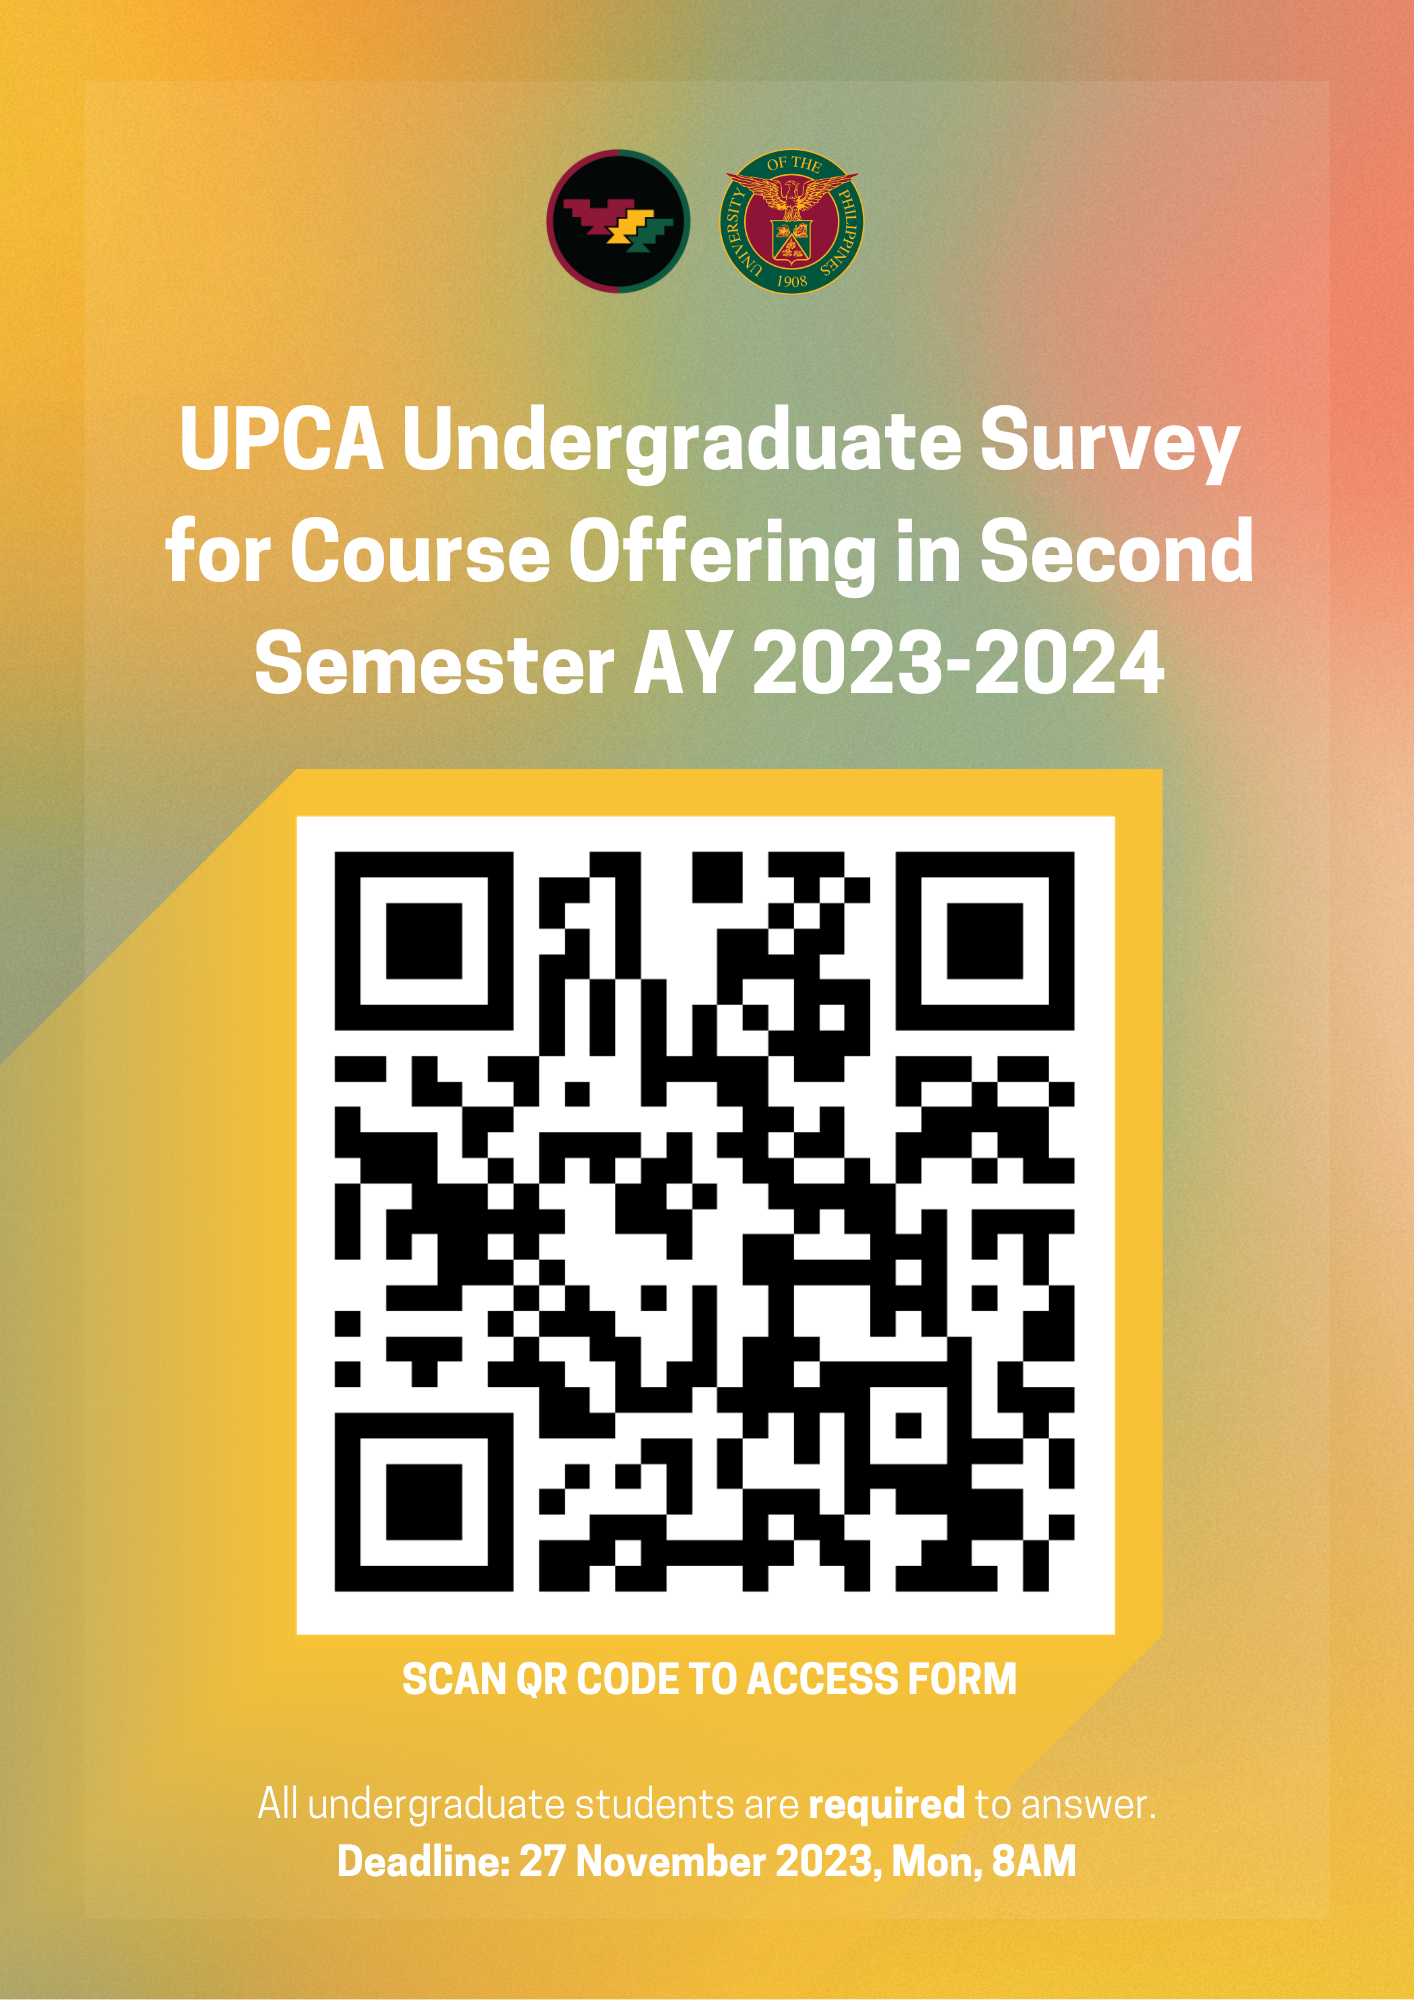 UPCA Undergraduate Survey for Course Offering in Second Semester AY 2023-2024